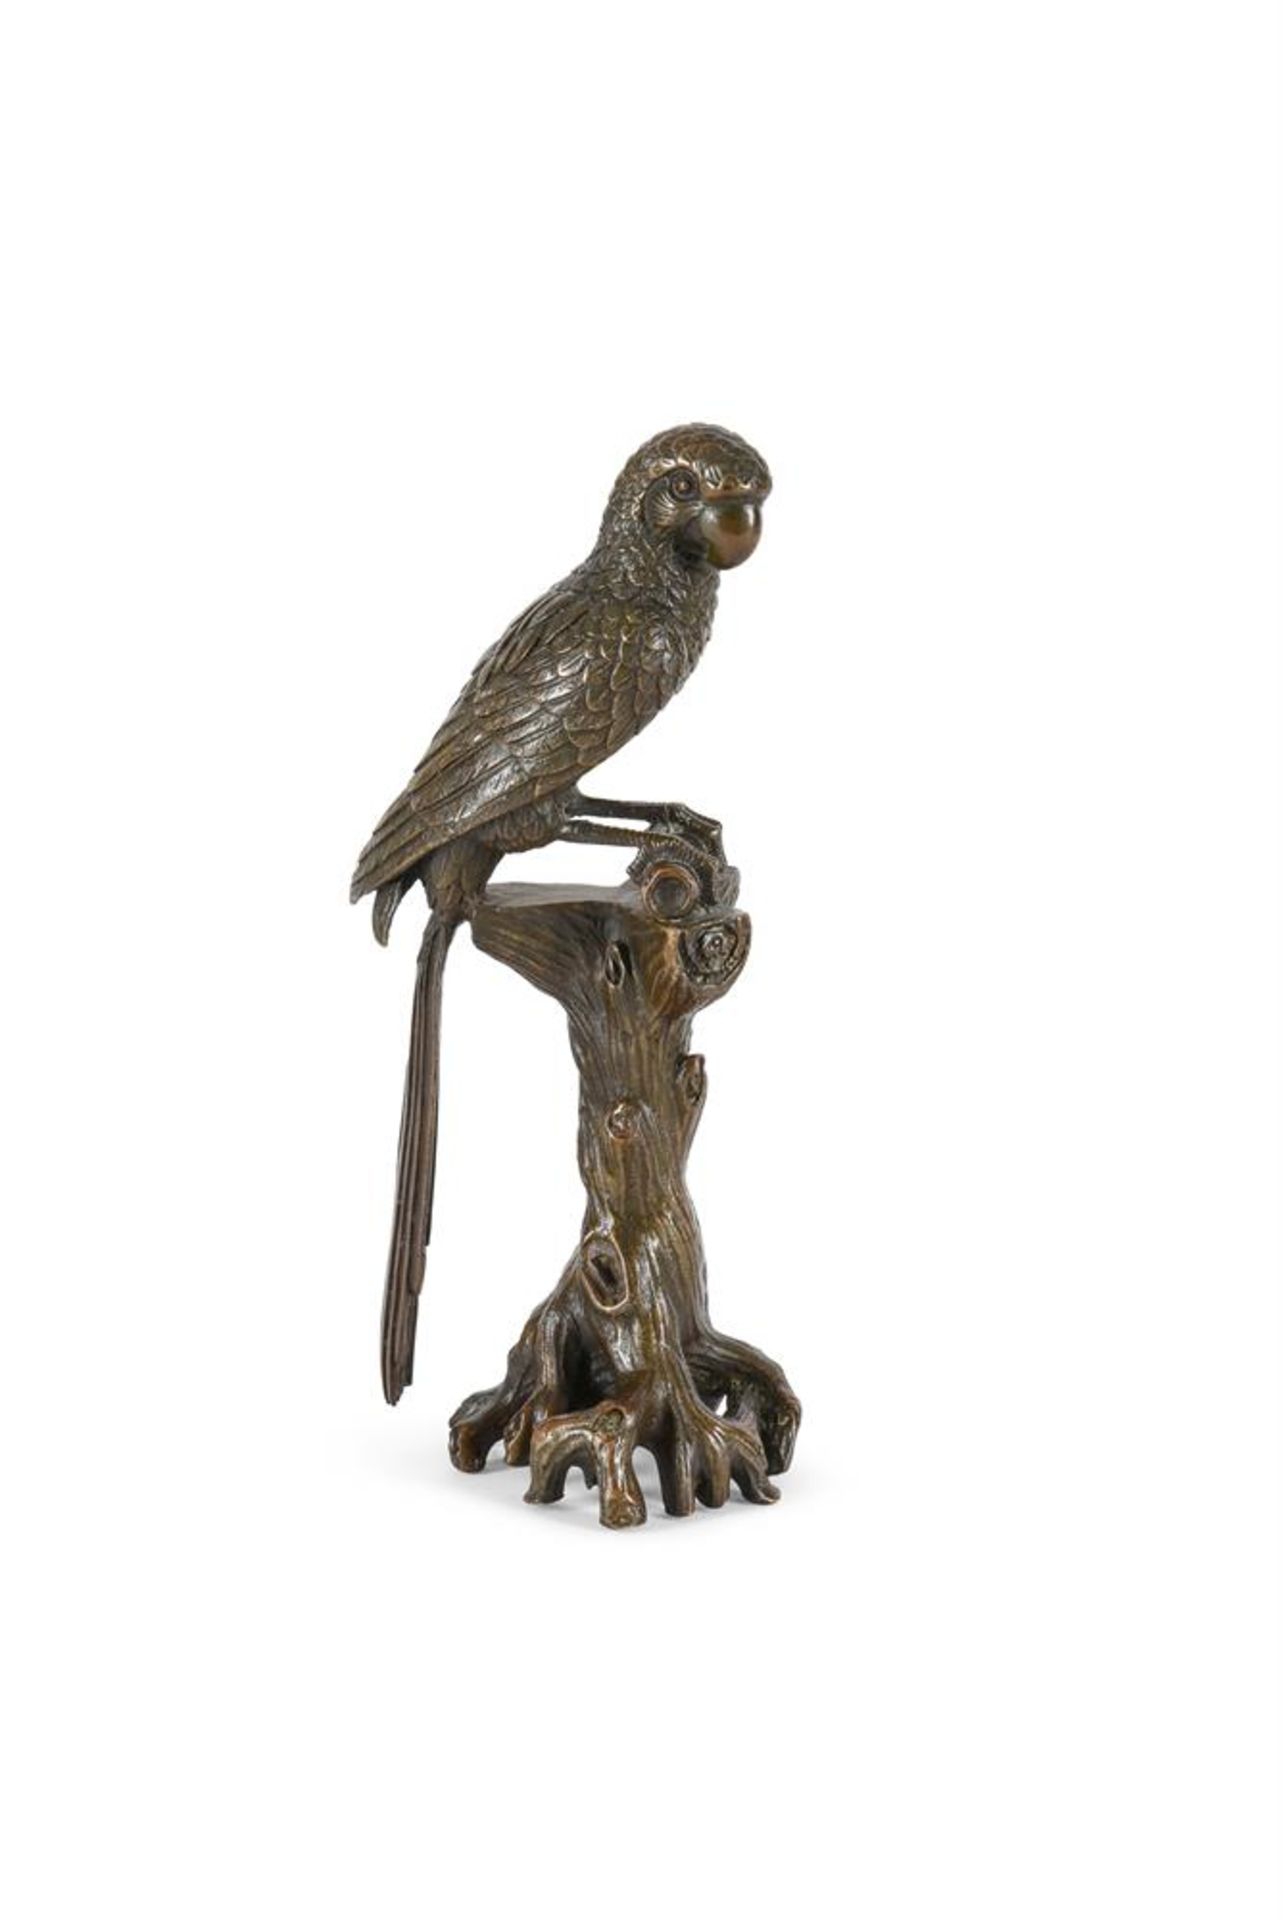 AN ANIMALIER BRONZE OF A PARROT ON A TREE STUMP POSSIBLY AUSTRIAN, LATE 19TH CENTURY - Image 2 of 3